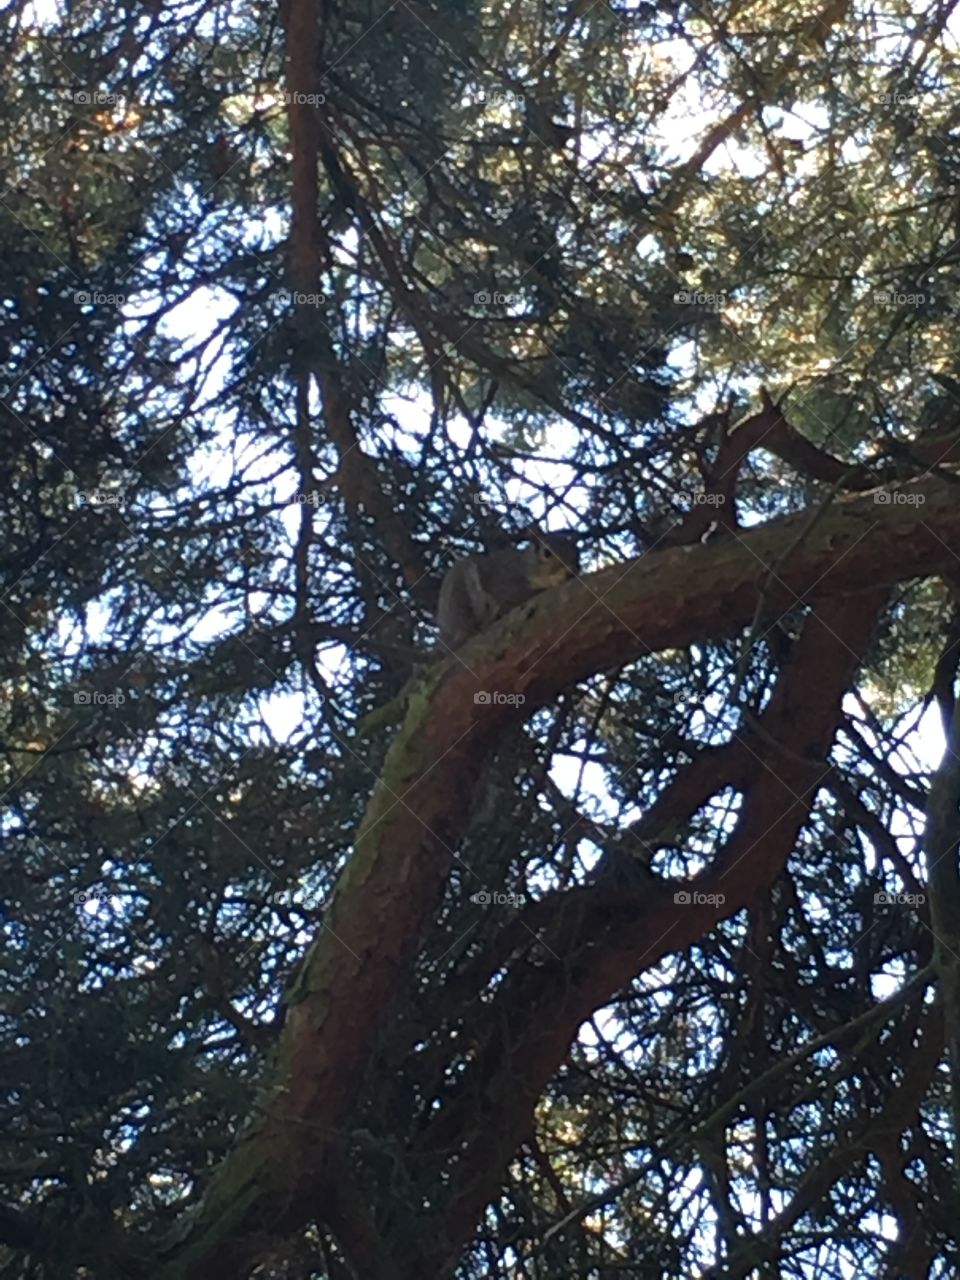 Squirrel hiding on a branch in a pine tree in summer in the garden 